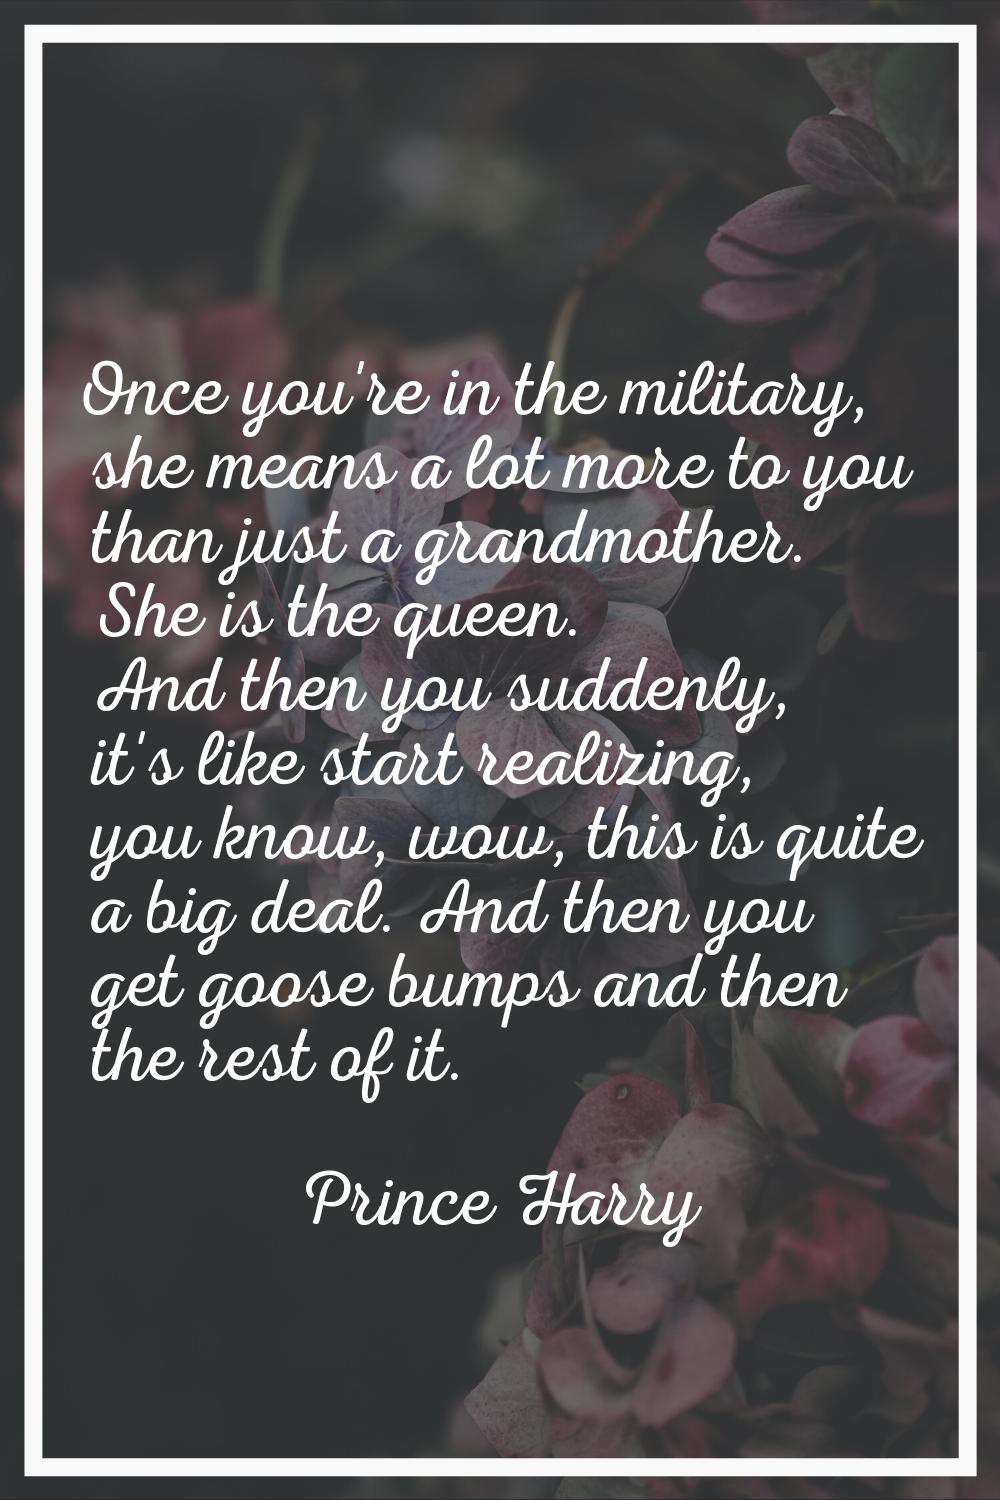 Once you're in the military, she means a lot more to you than just a grandmother. She is the queen.